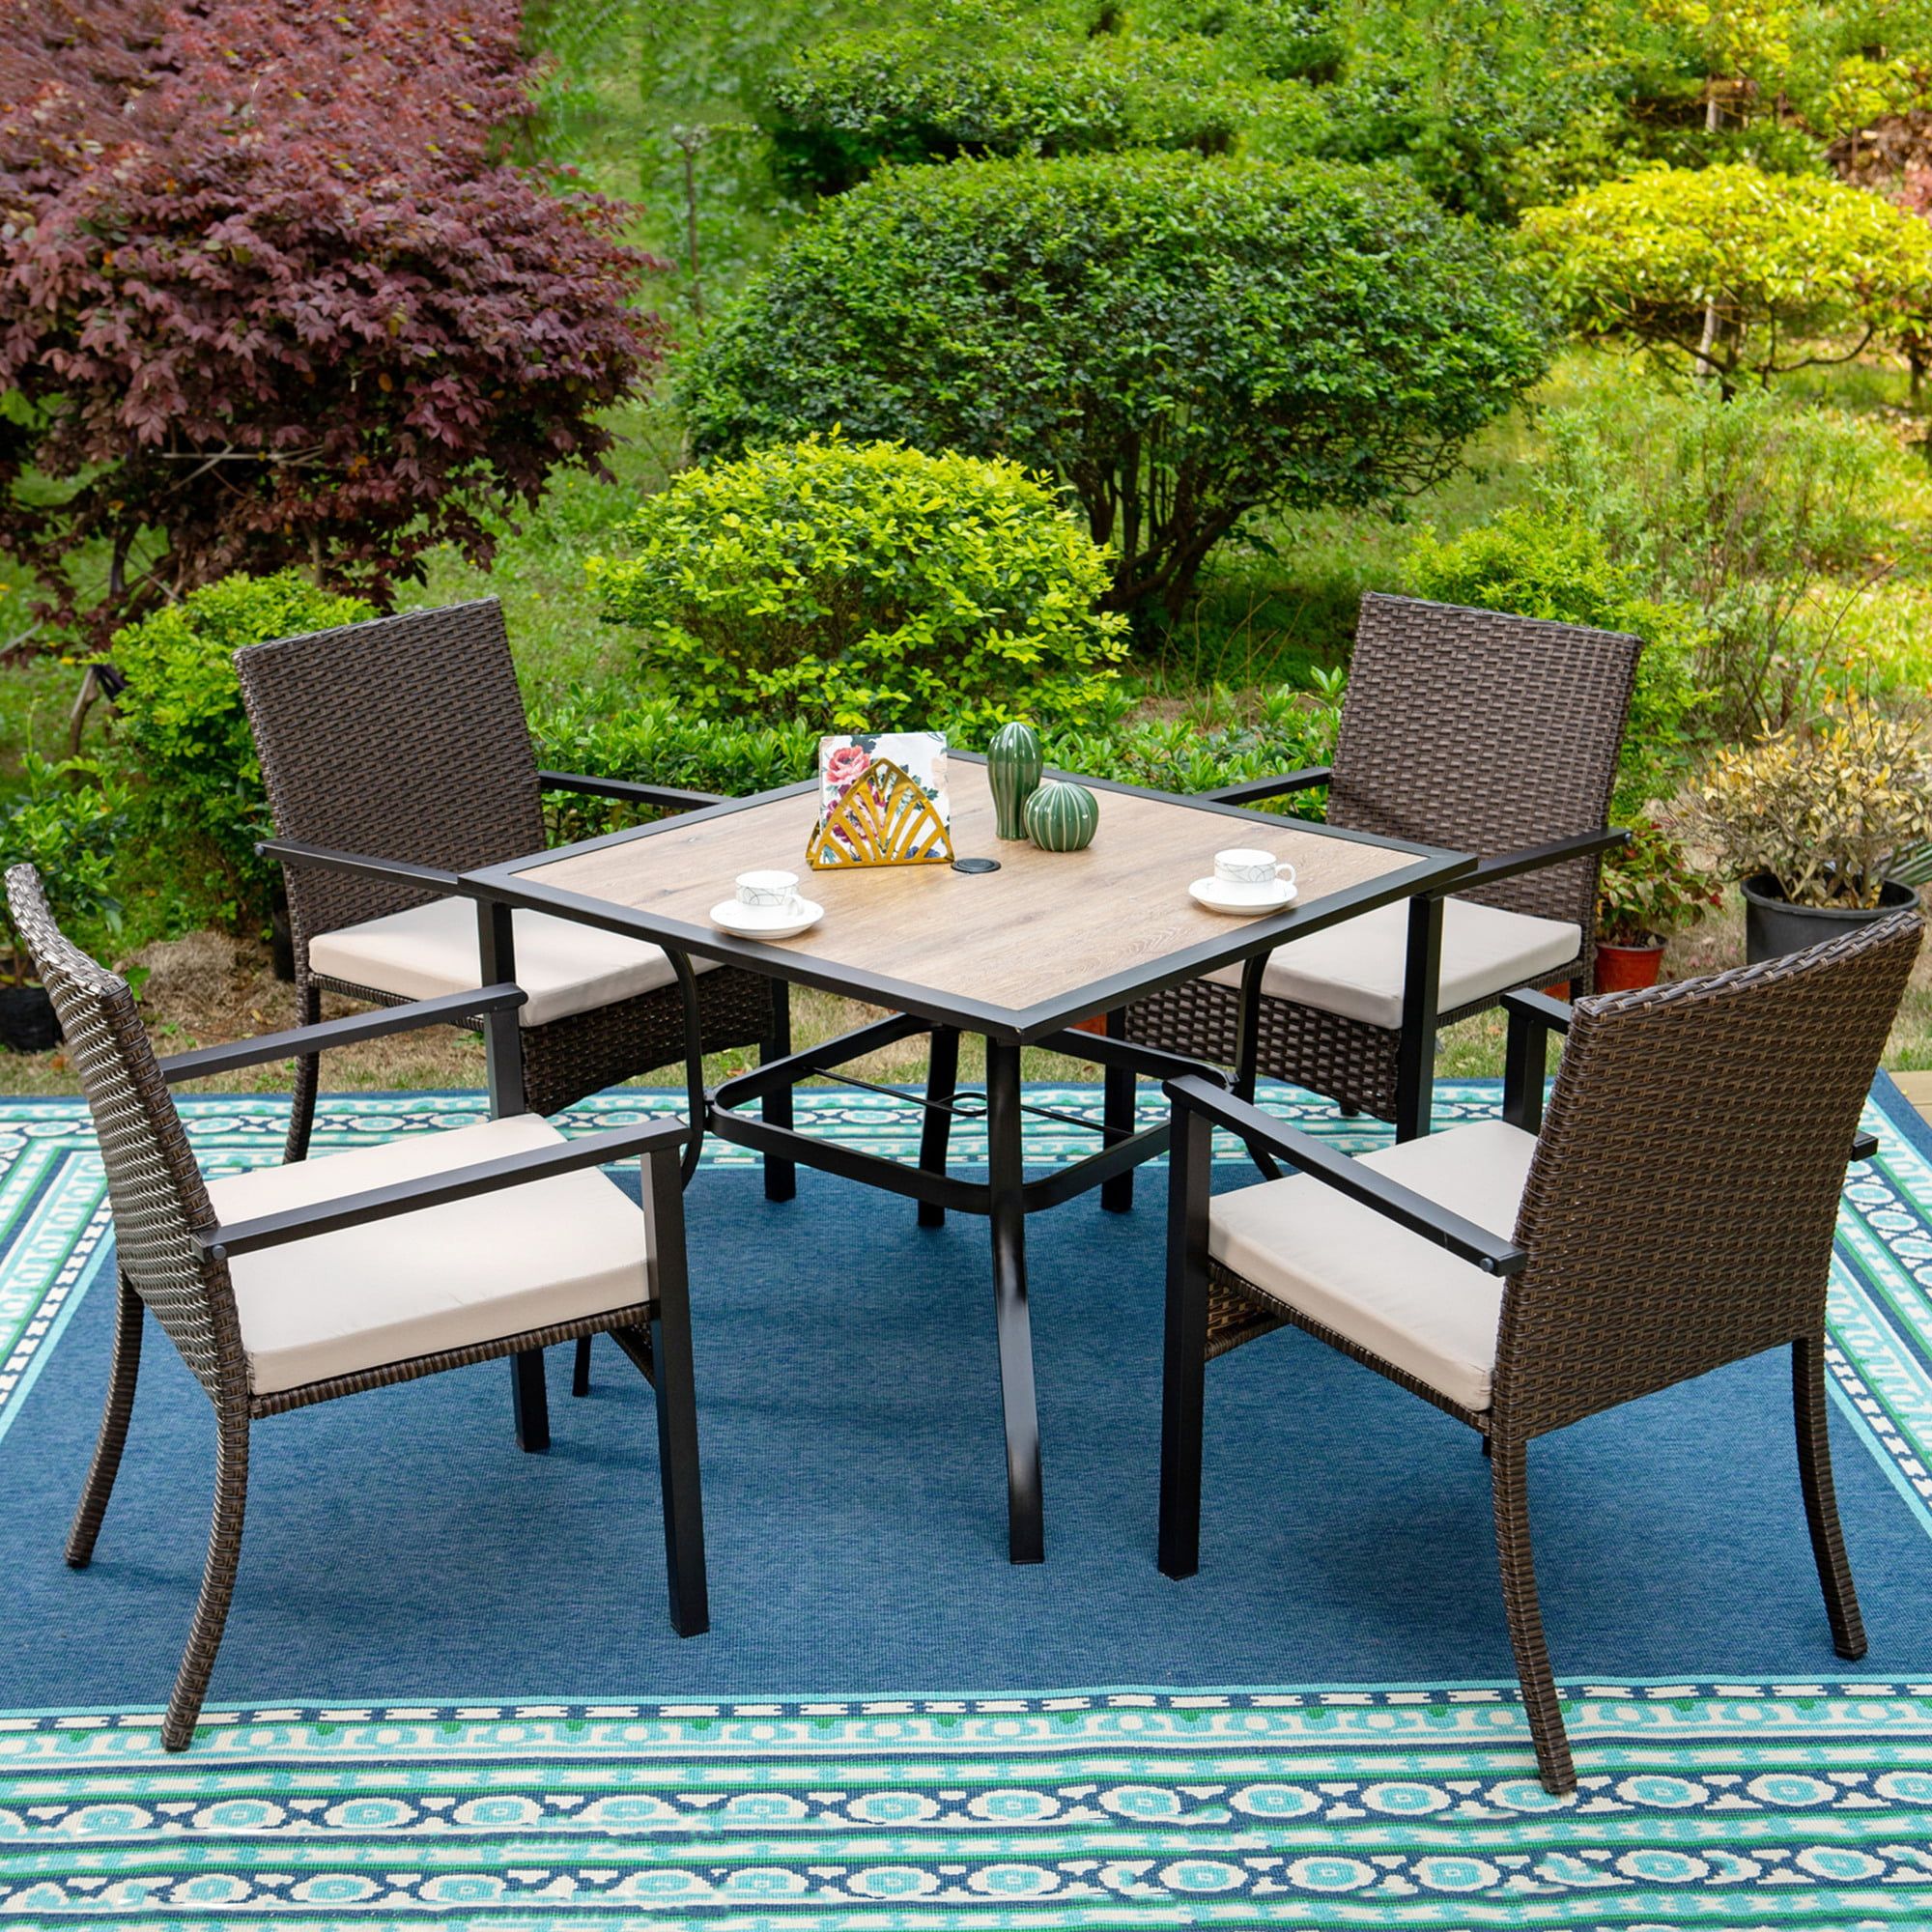 Mf Studio 5 Piece Outdoor Patio Dining Set With 4 Pcs Rattan Cushioned  Armchairs& 1 Pc Square Table, Dark Brown – Walmart With 5 Piece Patio Furniture Set (View 11 of 15)